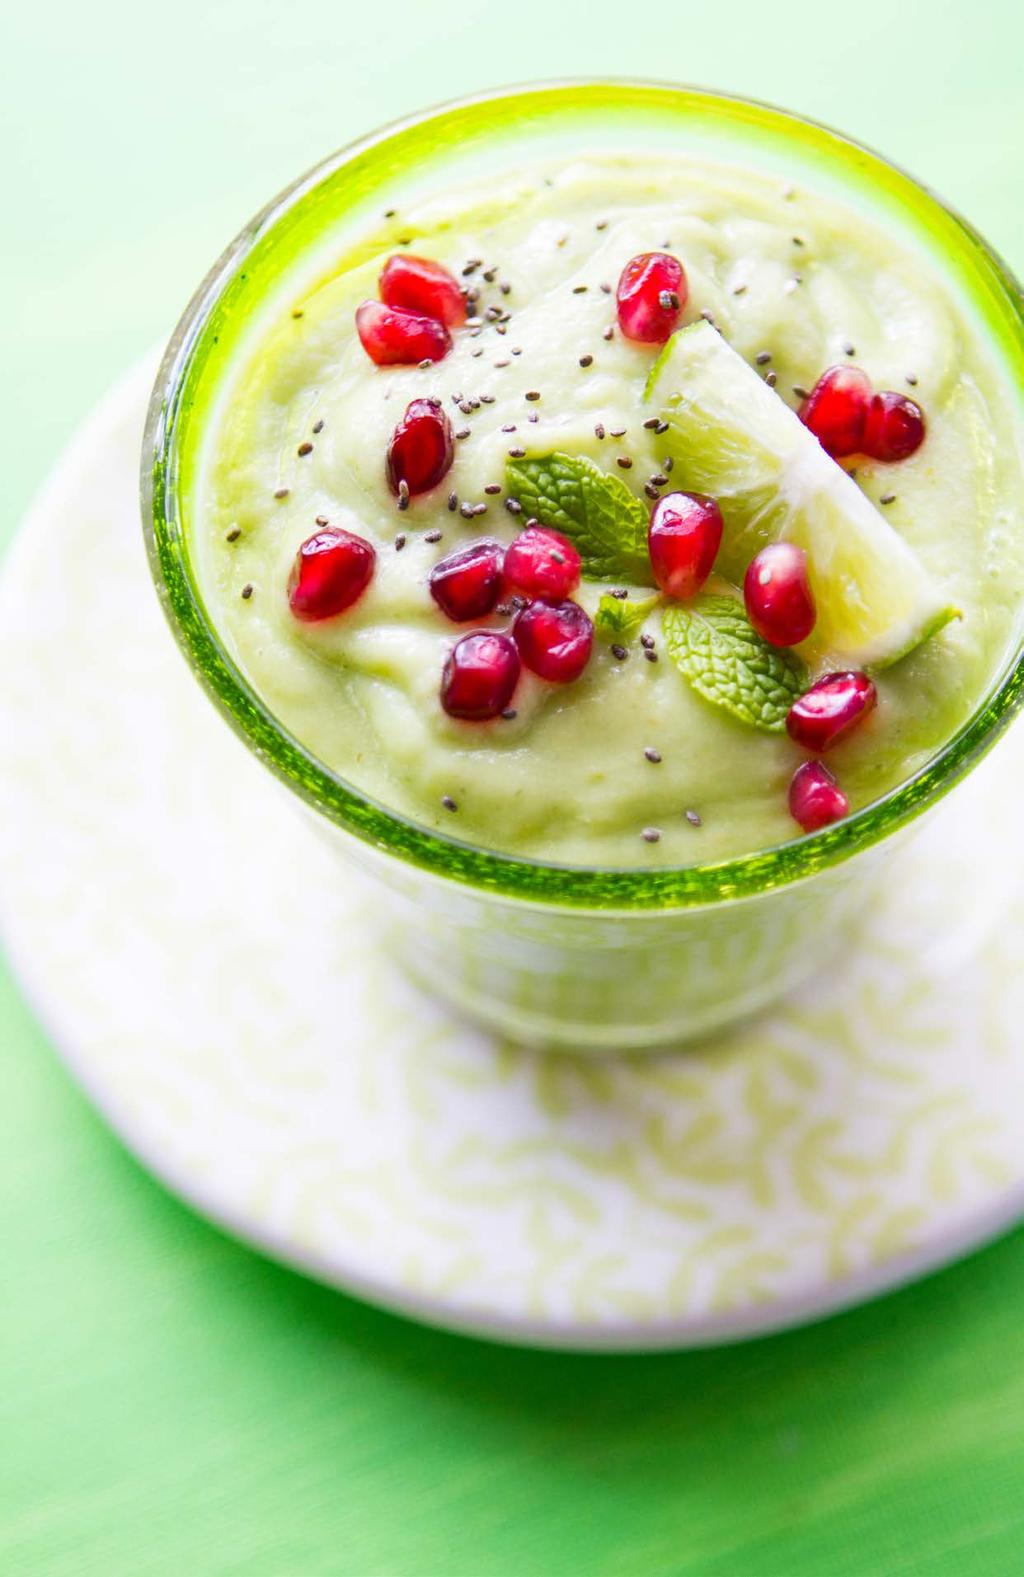 8. CUCUMBER PEAR BLAST 1 cucumber 1 pear, cored 2 tablespoons almond butter 1 tablespoon chia seeds 1